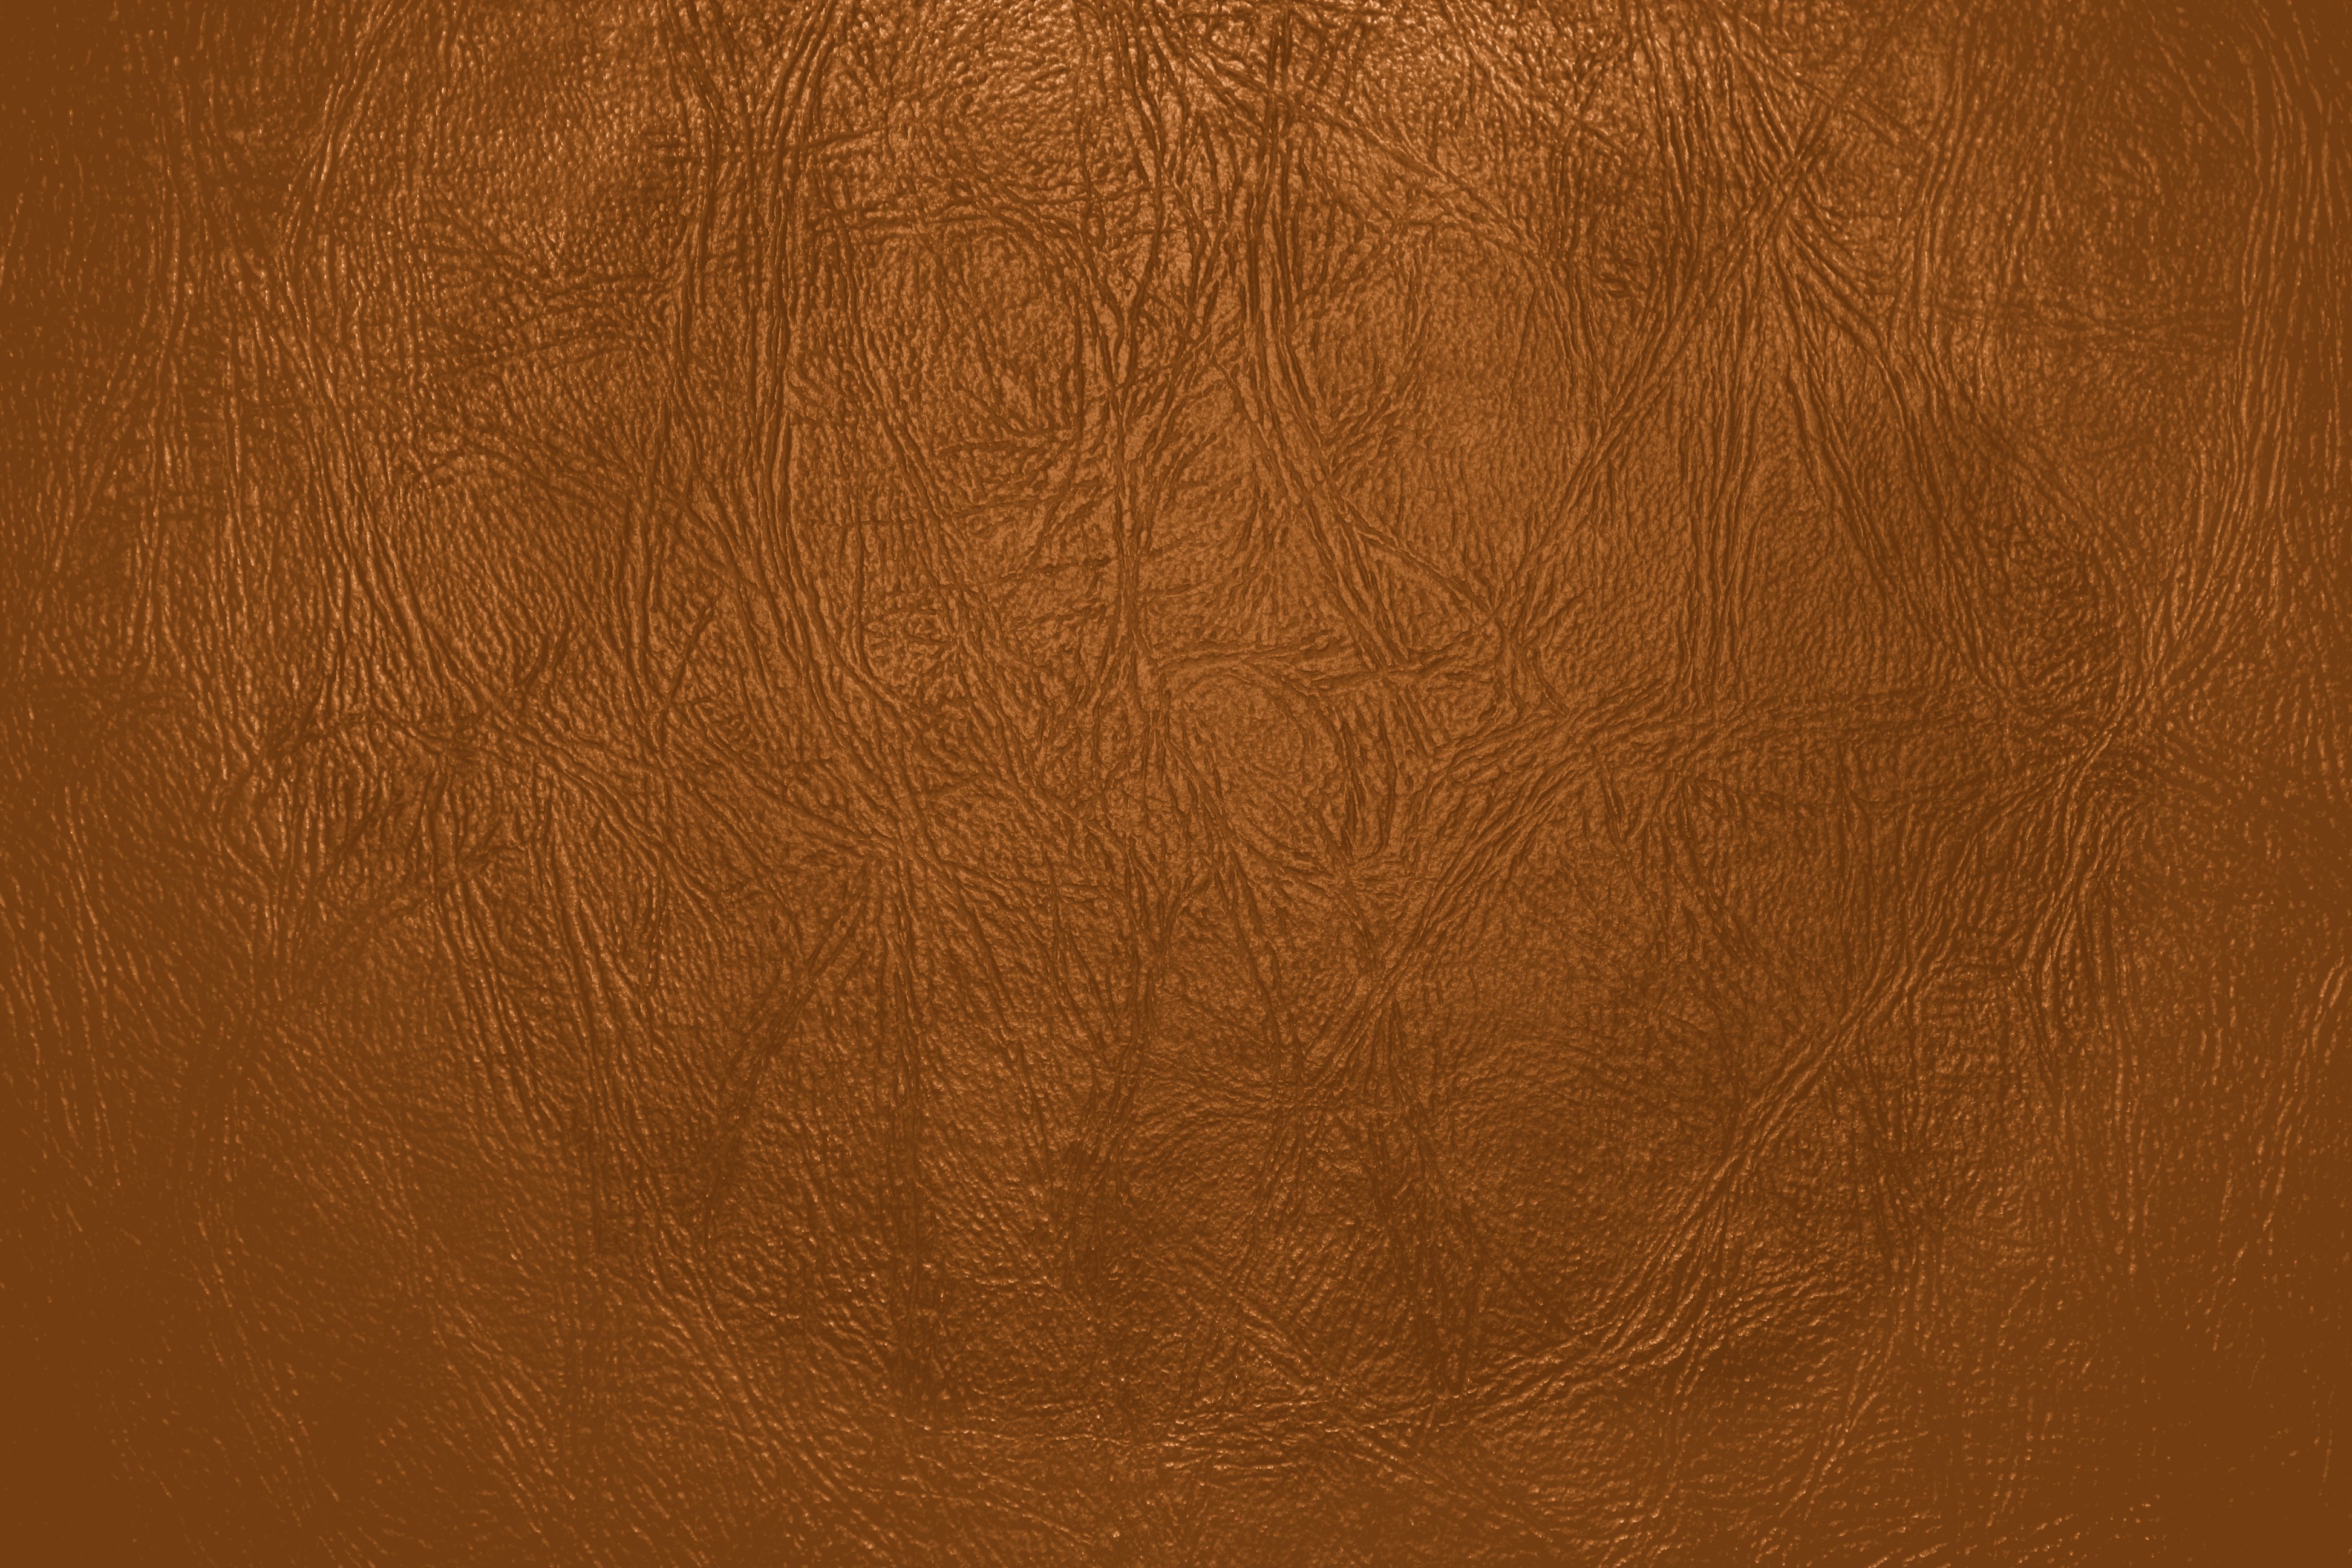 Rust Orange Leather Close Up Texture Picture Free Photograph Images, Photos, Reviews